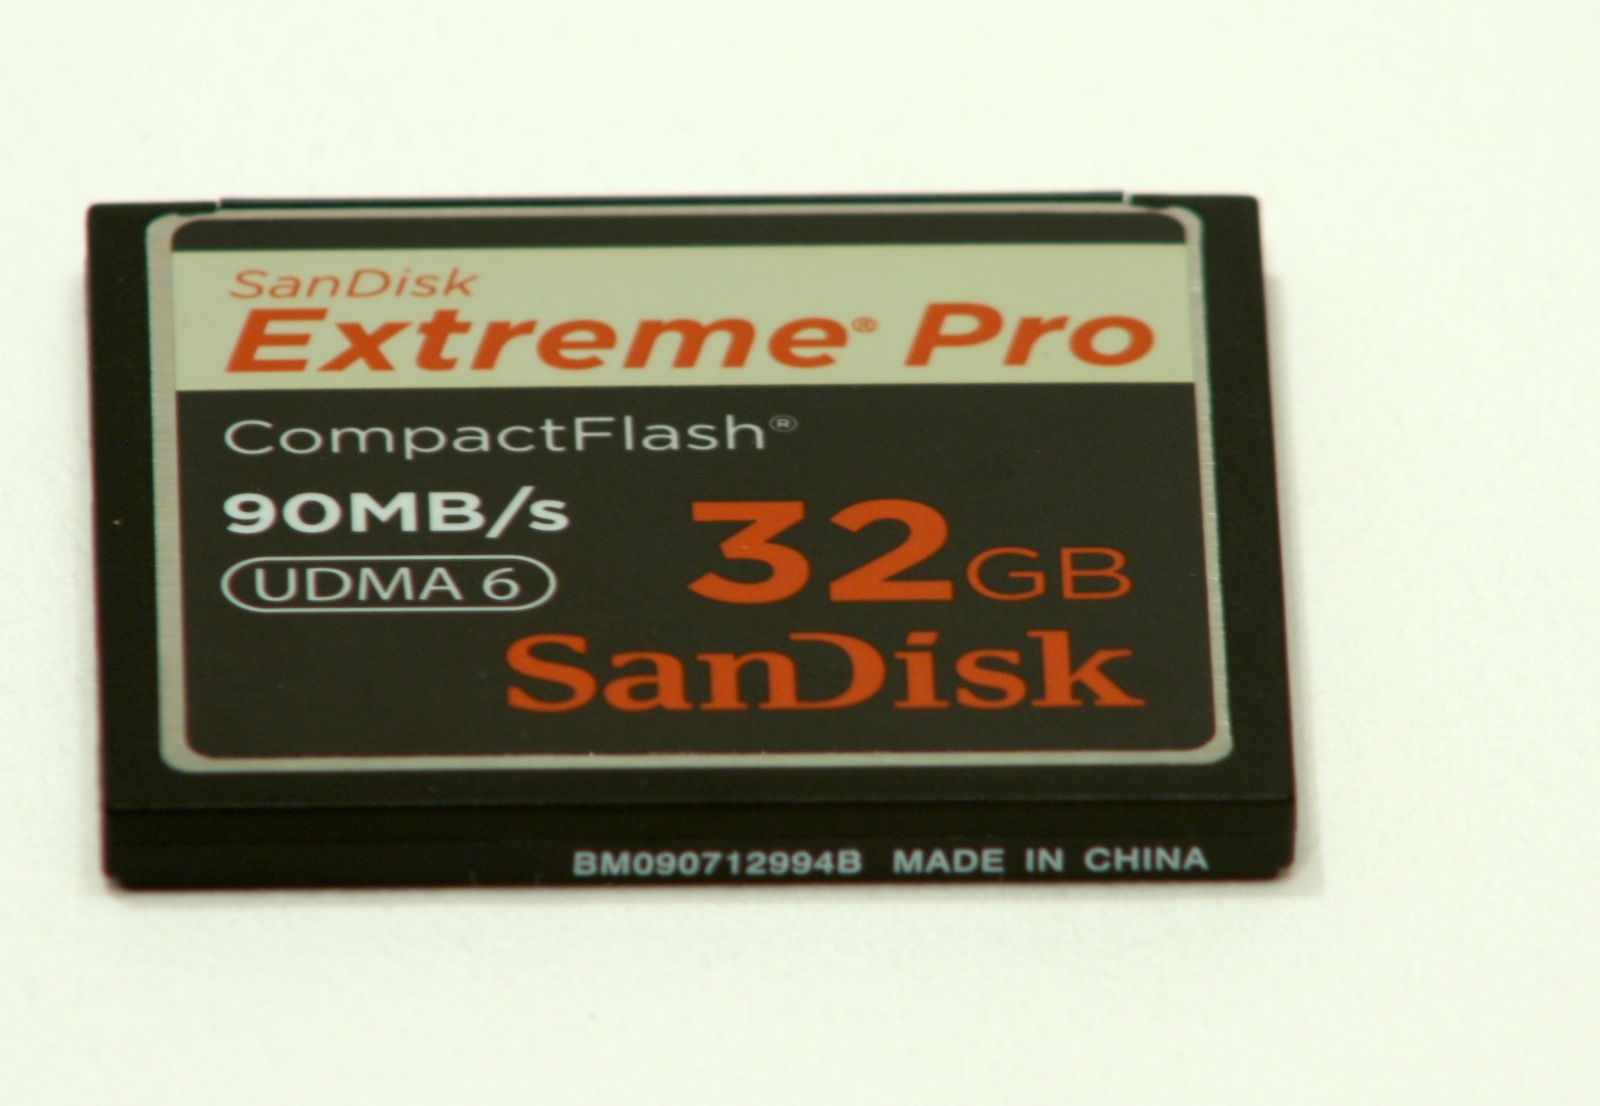 Sandisk Extreme Pro Compact Flash Memory card